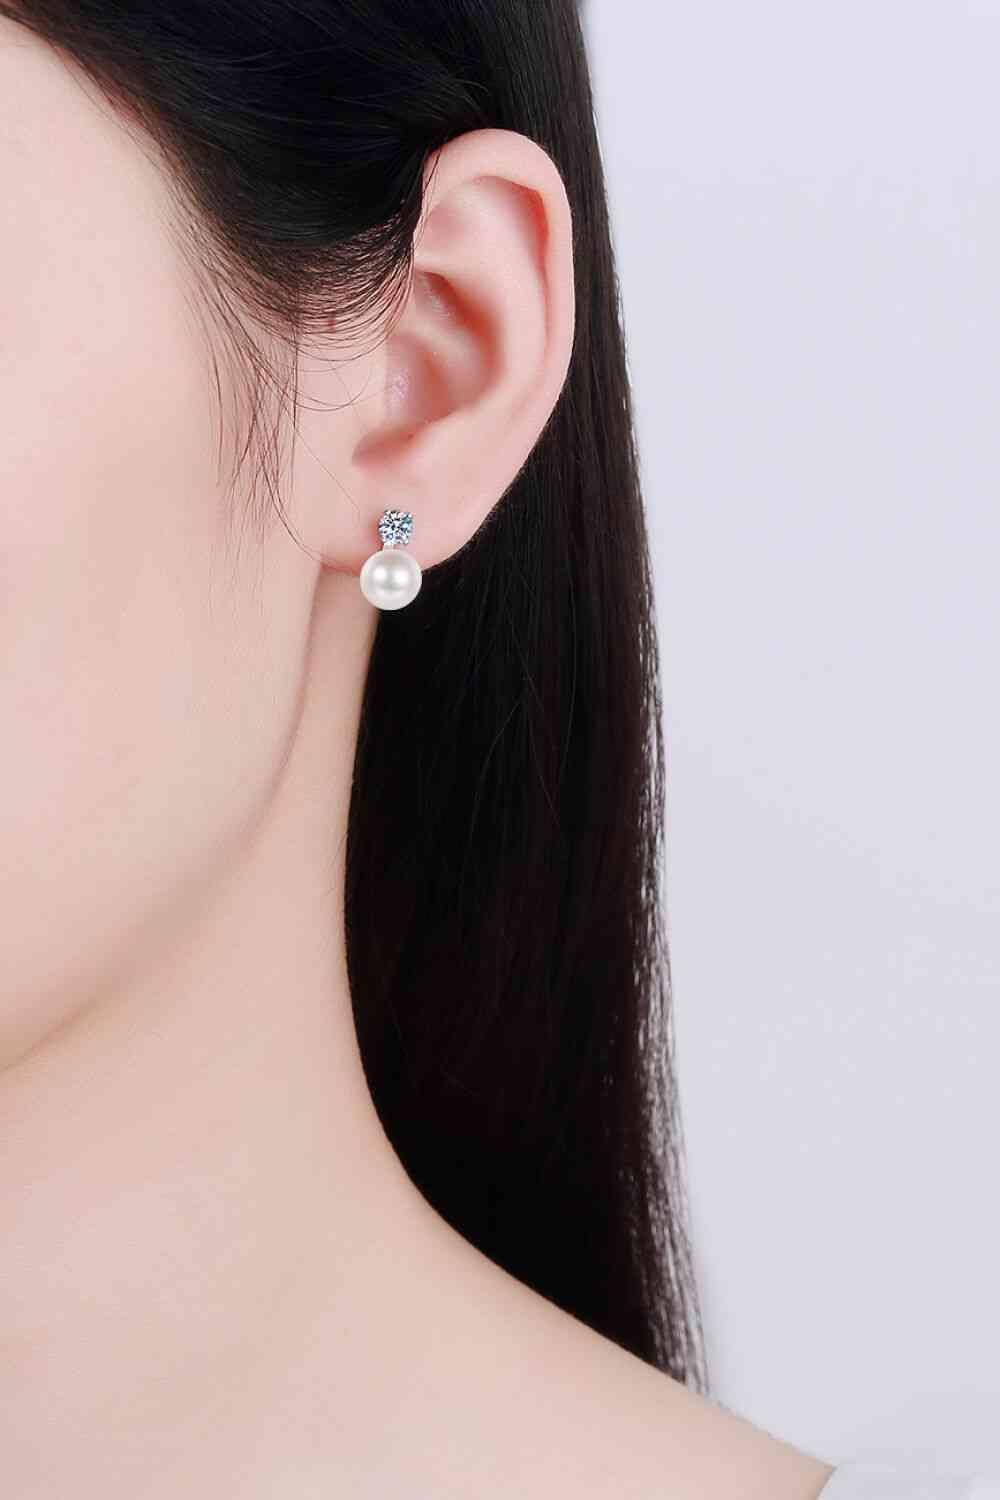 Moissanite Pearl Stud Earrings - God's Girl Gifts And Apparel